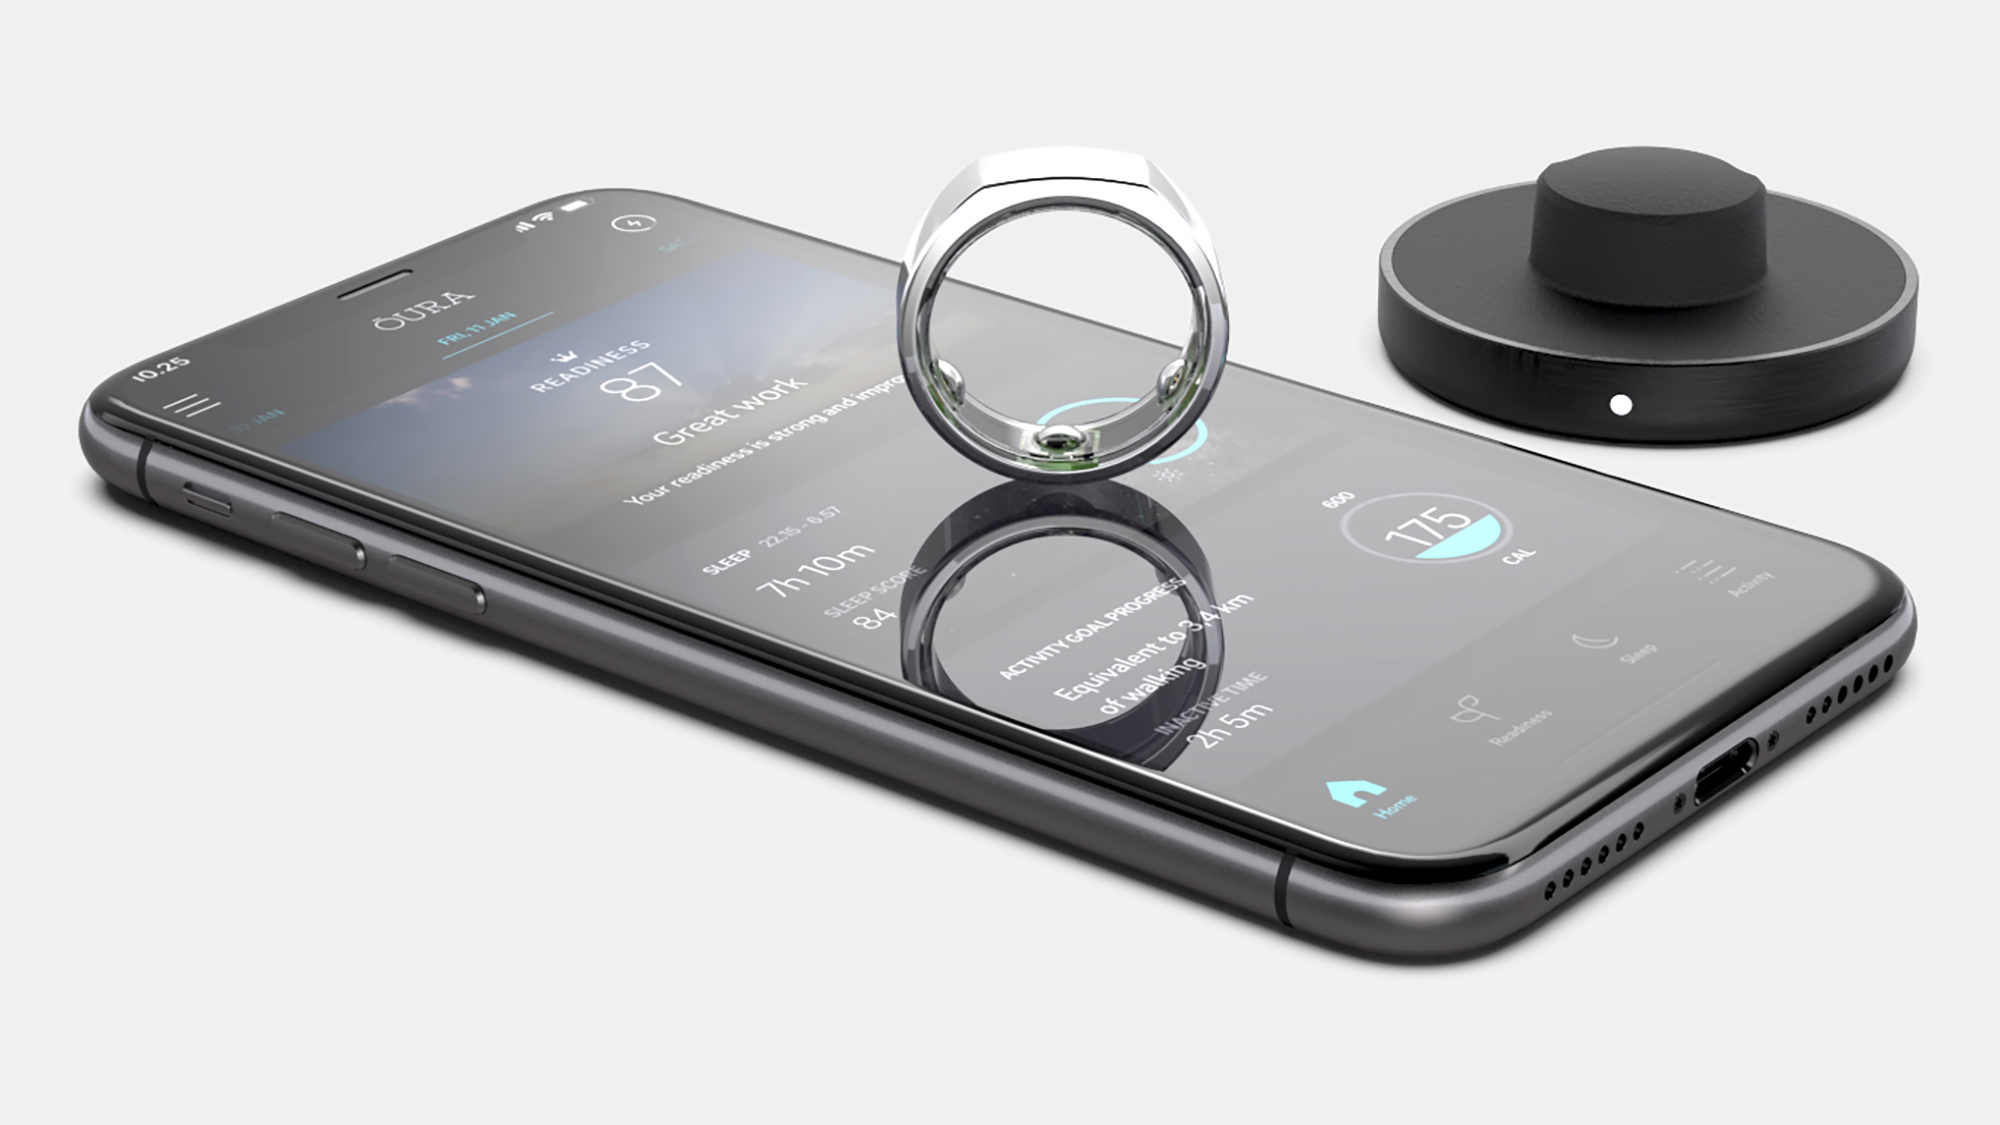 Oura Ring 3 with phone and app